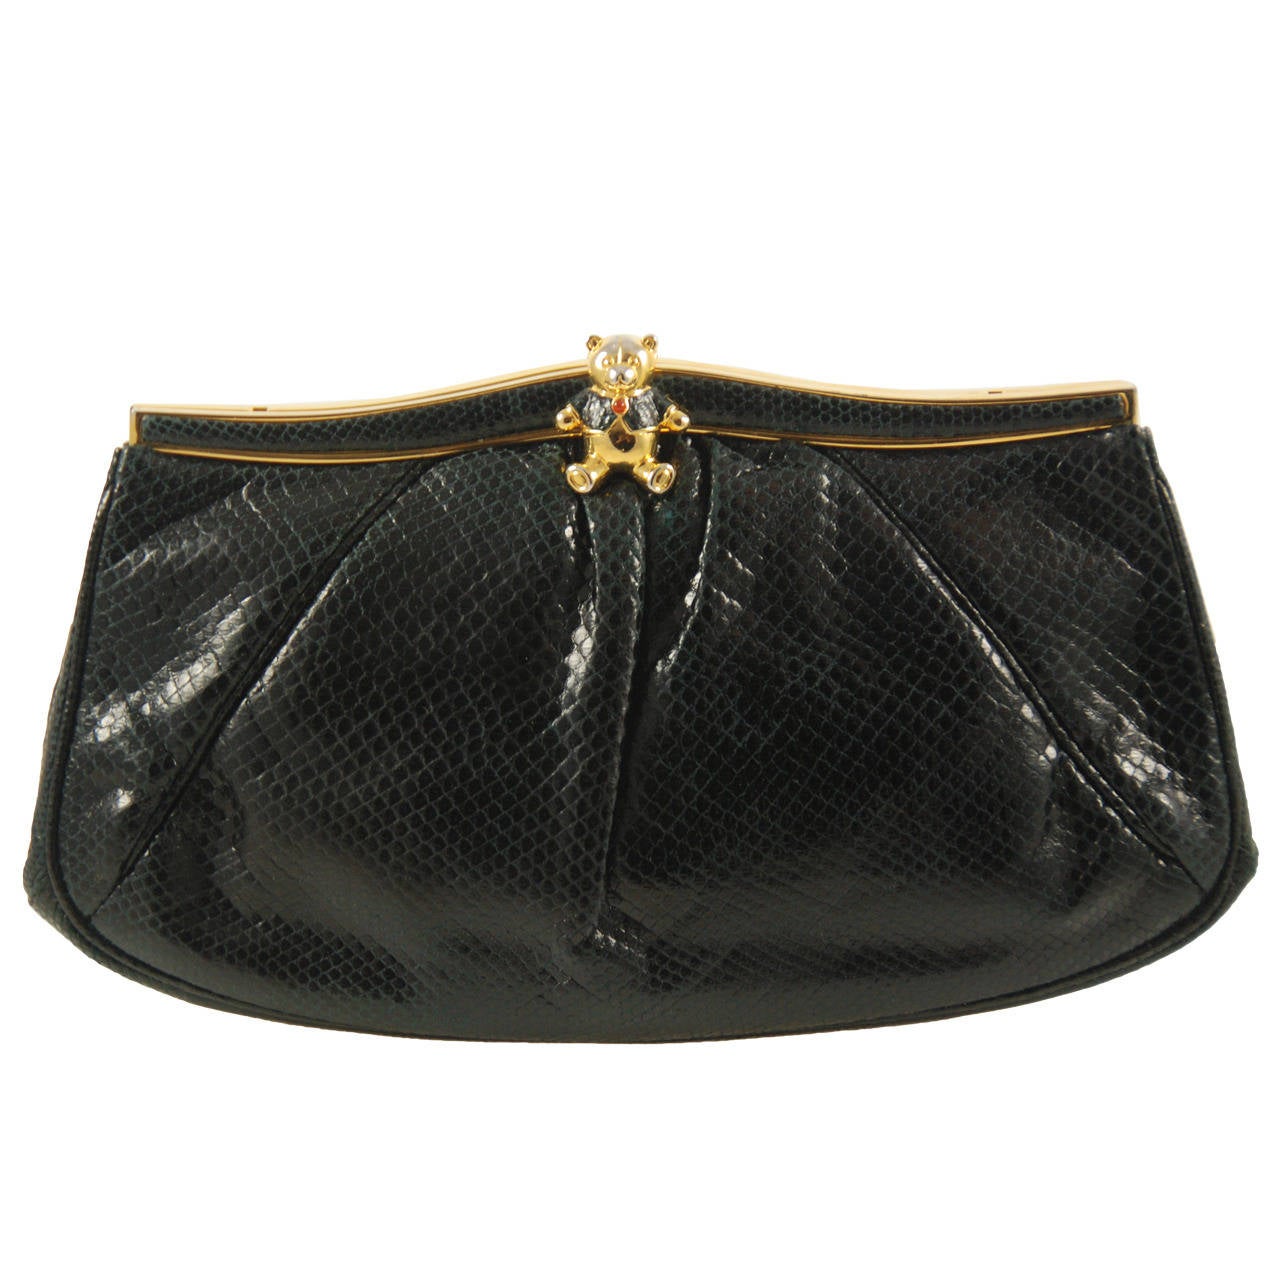 1980s Judith Leiber Black Karung Clutch with Teddy Bear Clasp For Sale